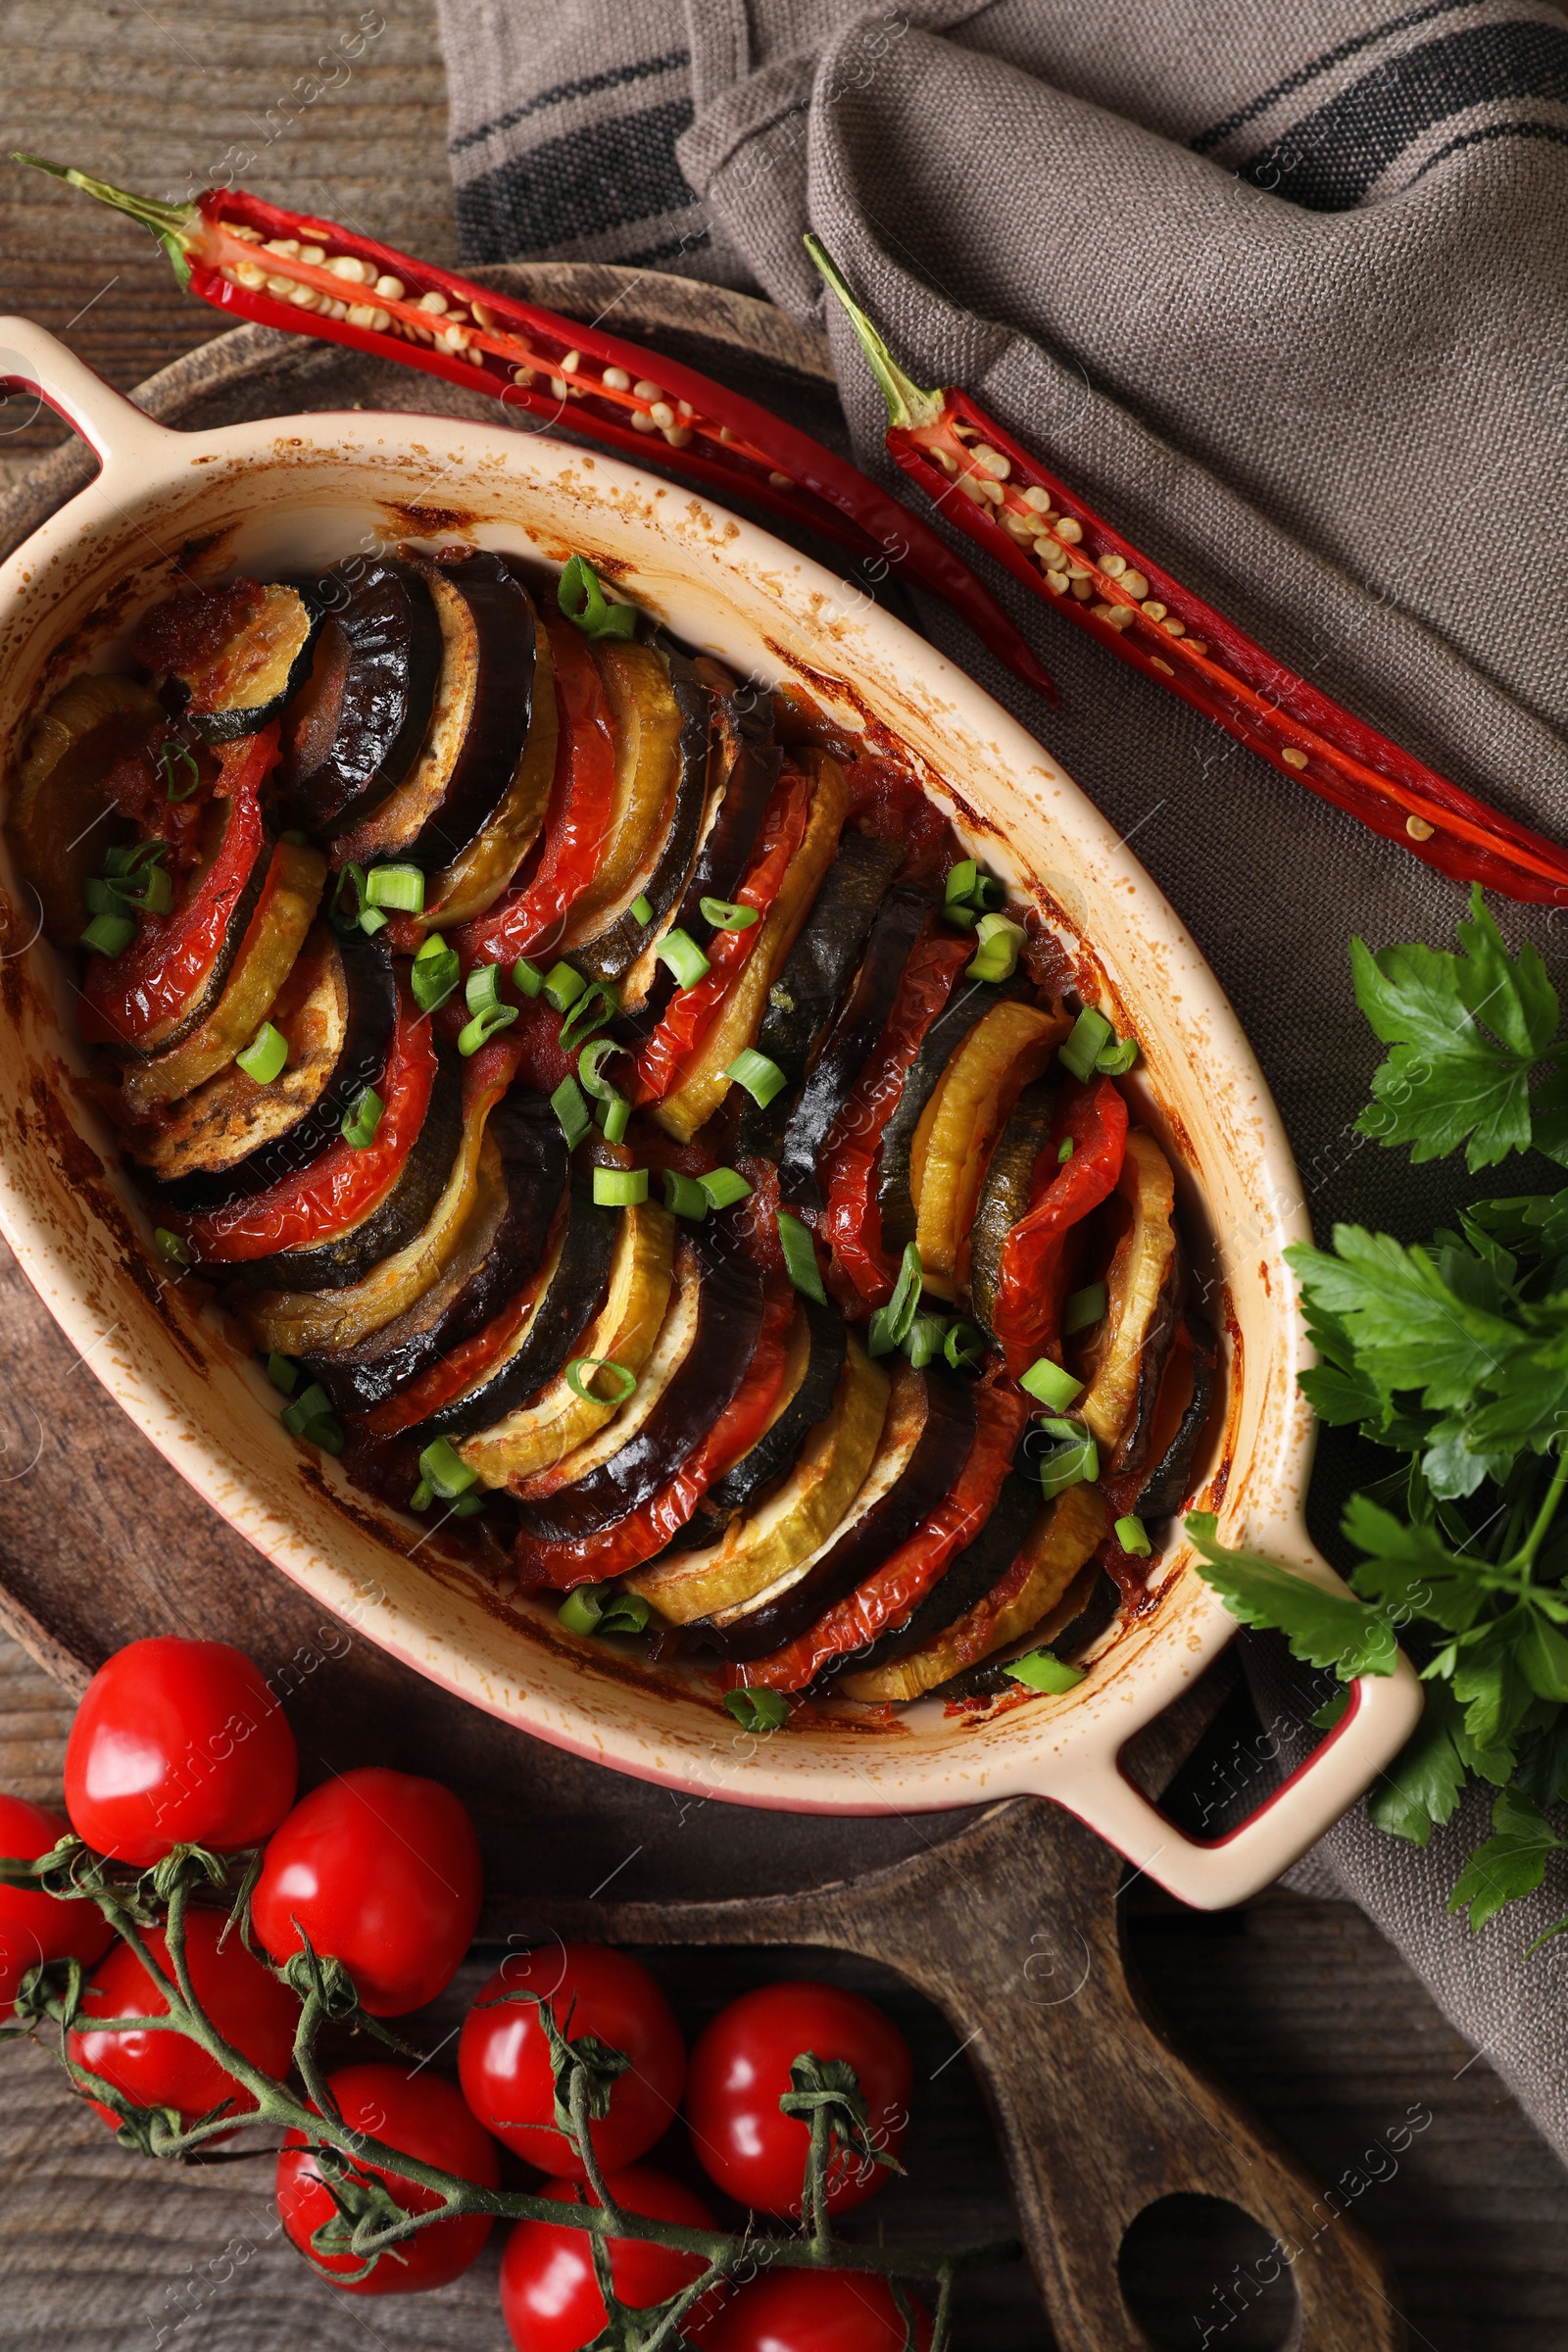 Photo of Delicious ratatouille and ingredients on table, flat lay